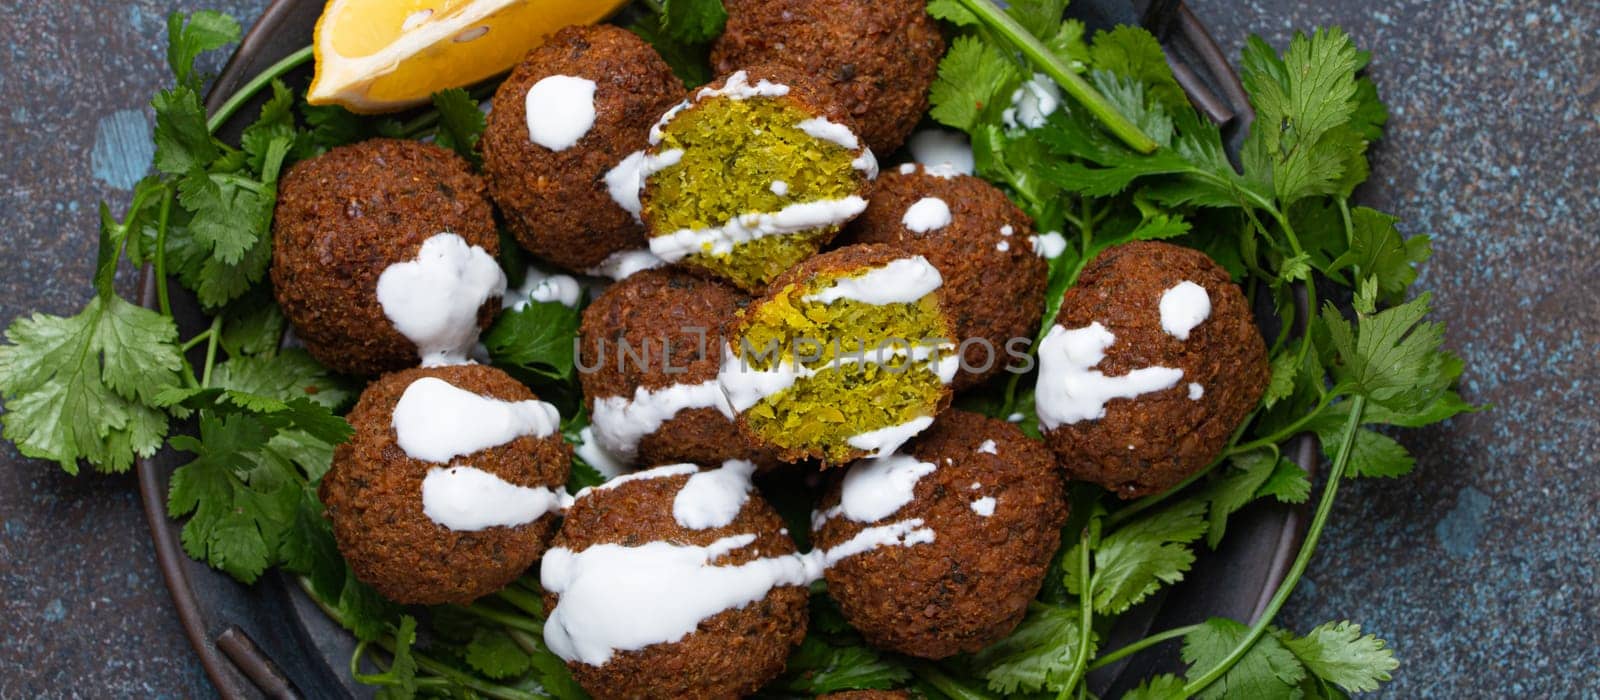 Plate of fried falafel balls served with fresh green cilantro and lemon top view on rustic concrete background. Traditional vegan dish of Middle Eastern cuisine